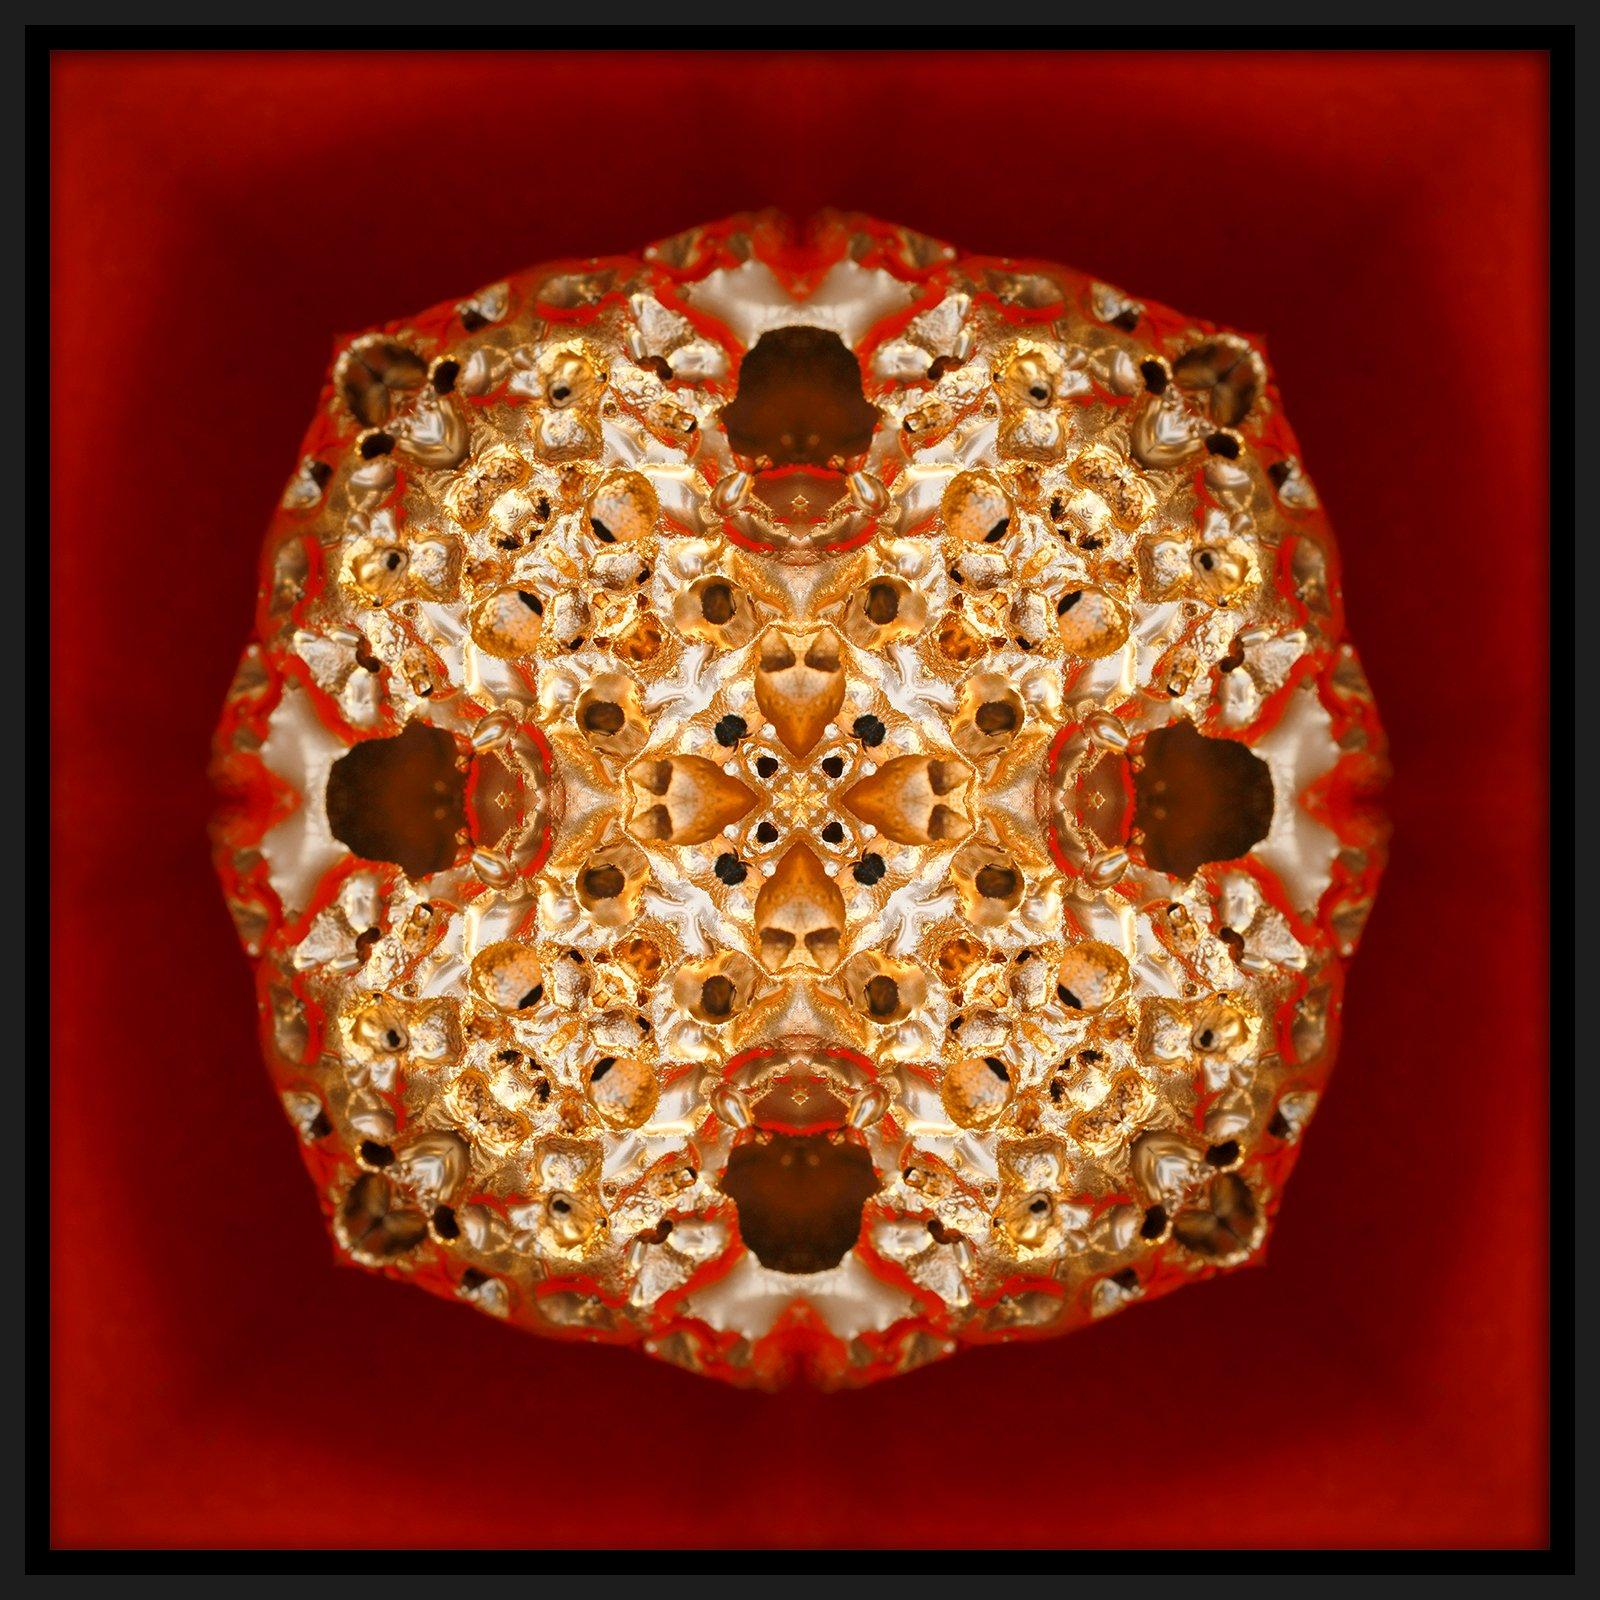 Olivier Muhlhoff Abstract Photograph - "Pépite 2", Gold Nugget on Red Semi-abstract Printed Photography on Dibond Panel